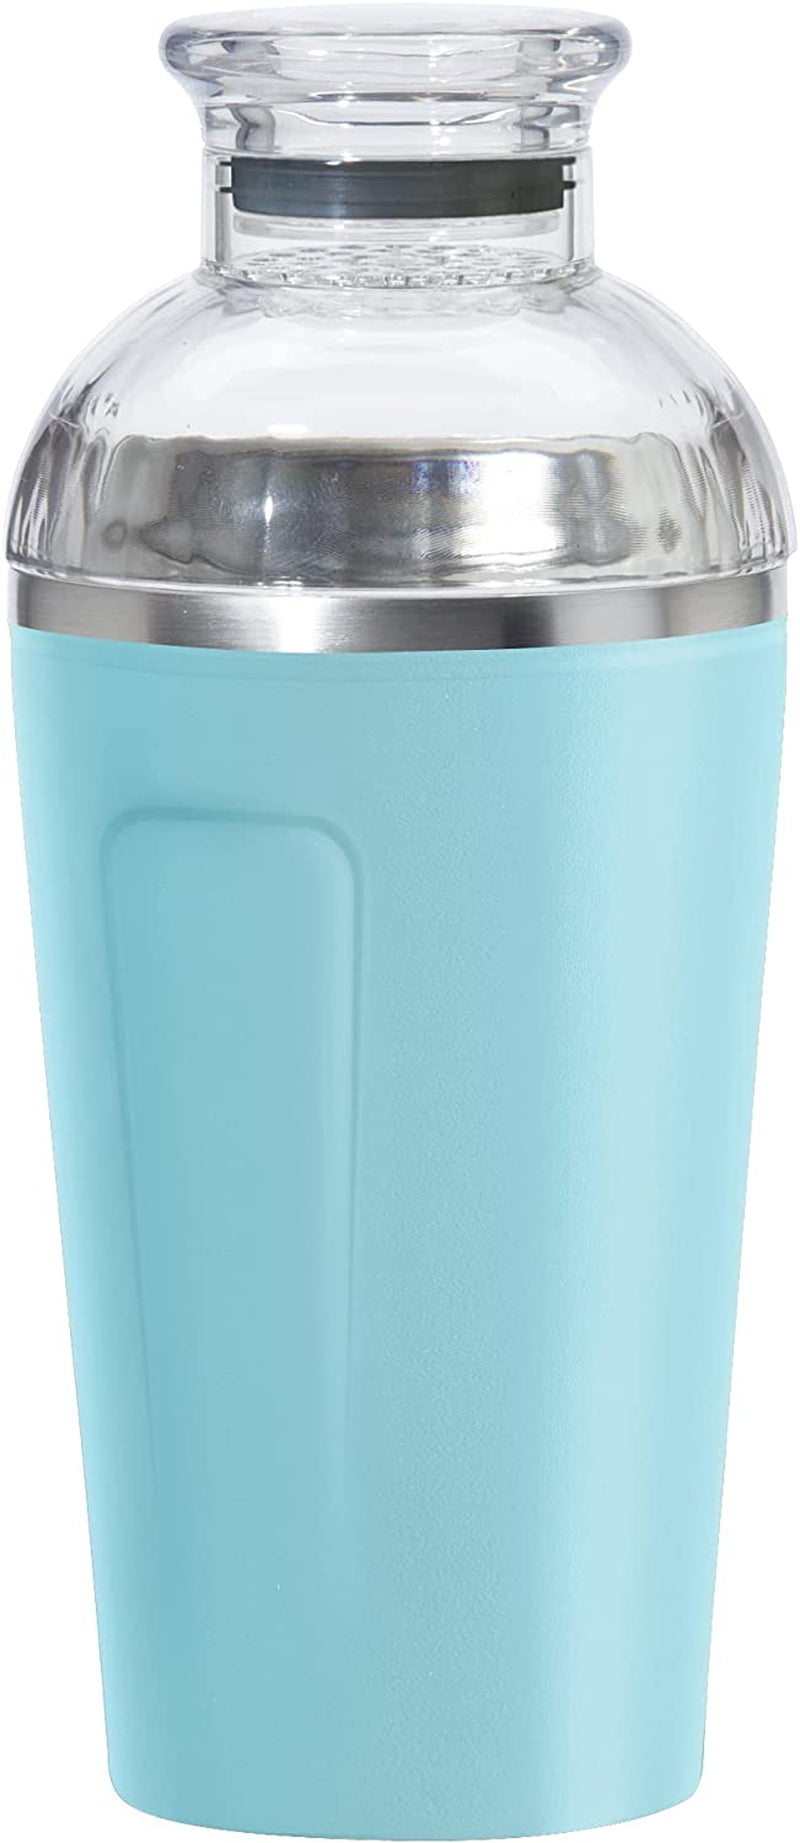 Oggi Groove Insulated Cocktail Shaker-17Oz Double Wall Vacuum Insulated Stainless Steel Shaker, Tritan Lid Has Built in Strainer, Ideal Cocktail, Martini Shaker, Margarita Shaker, Gold (7404.4) Home & Garden > Kitchen & Dining > Barware Oggi Turquoise 17-Ounce 